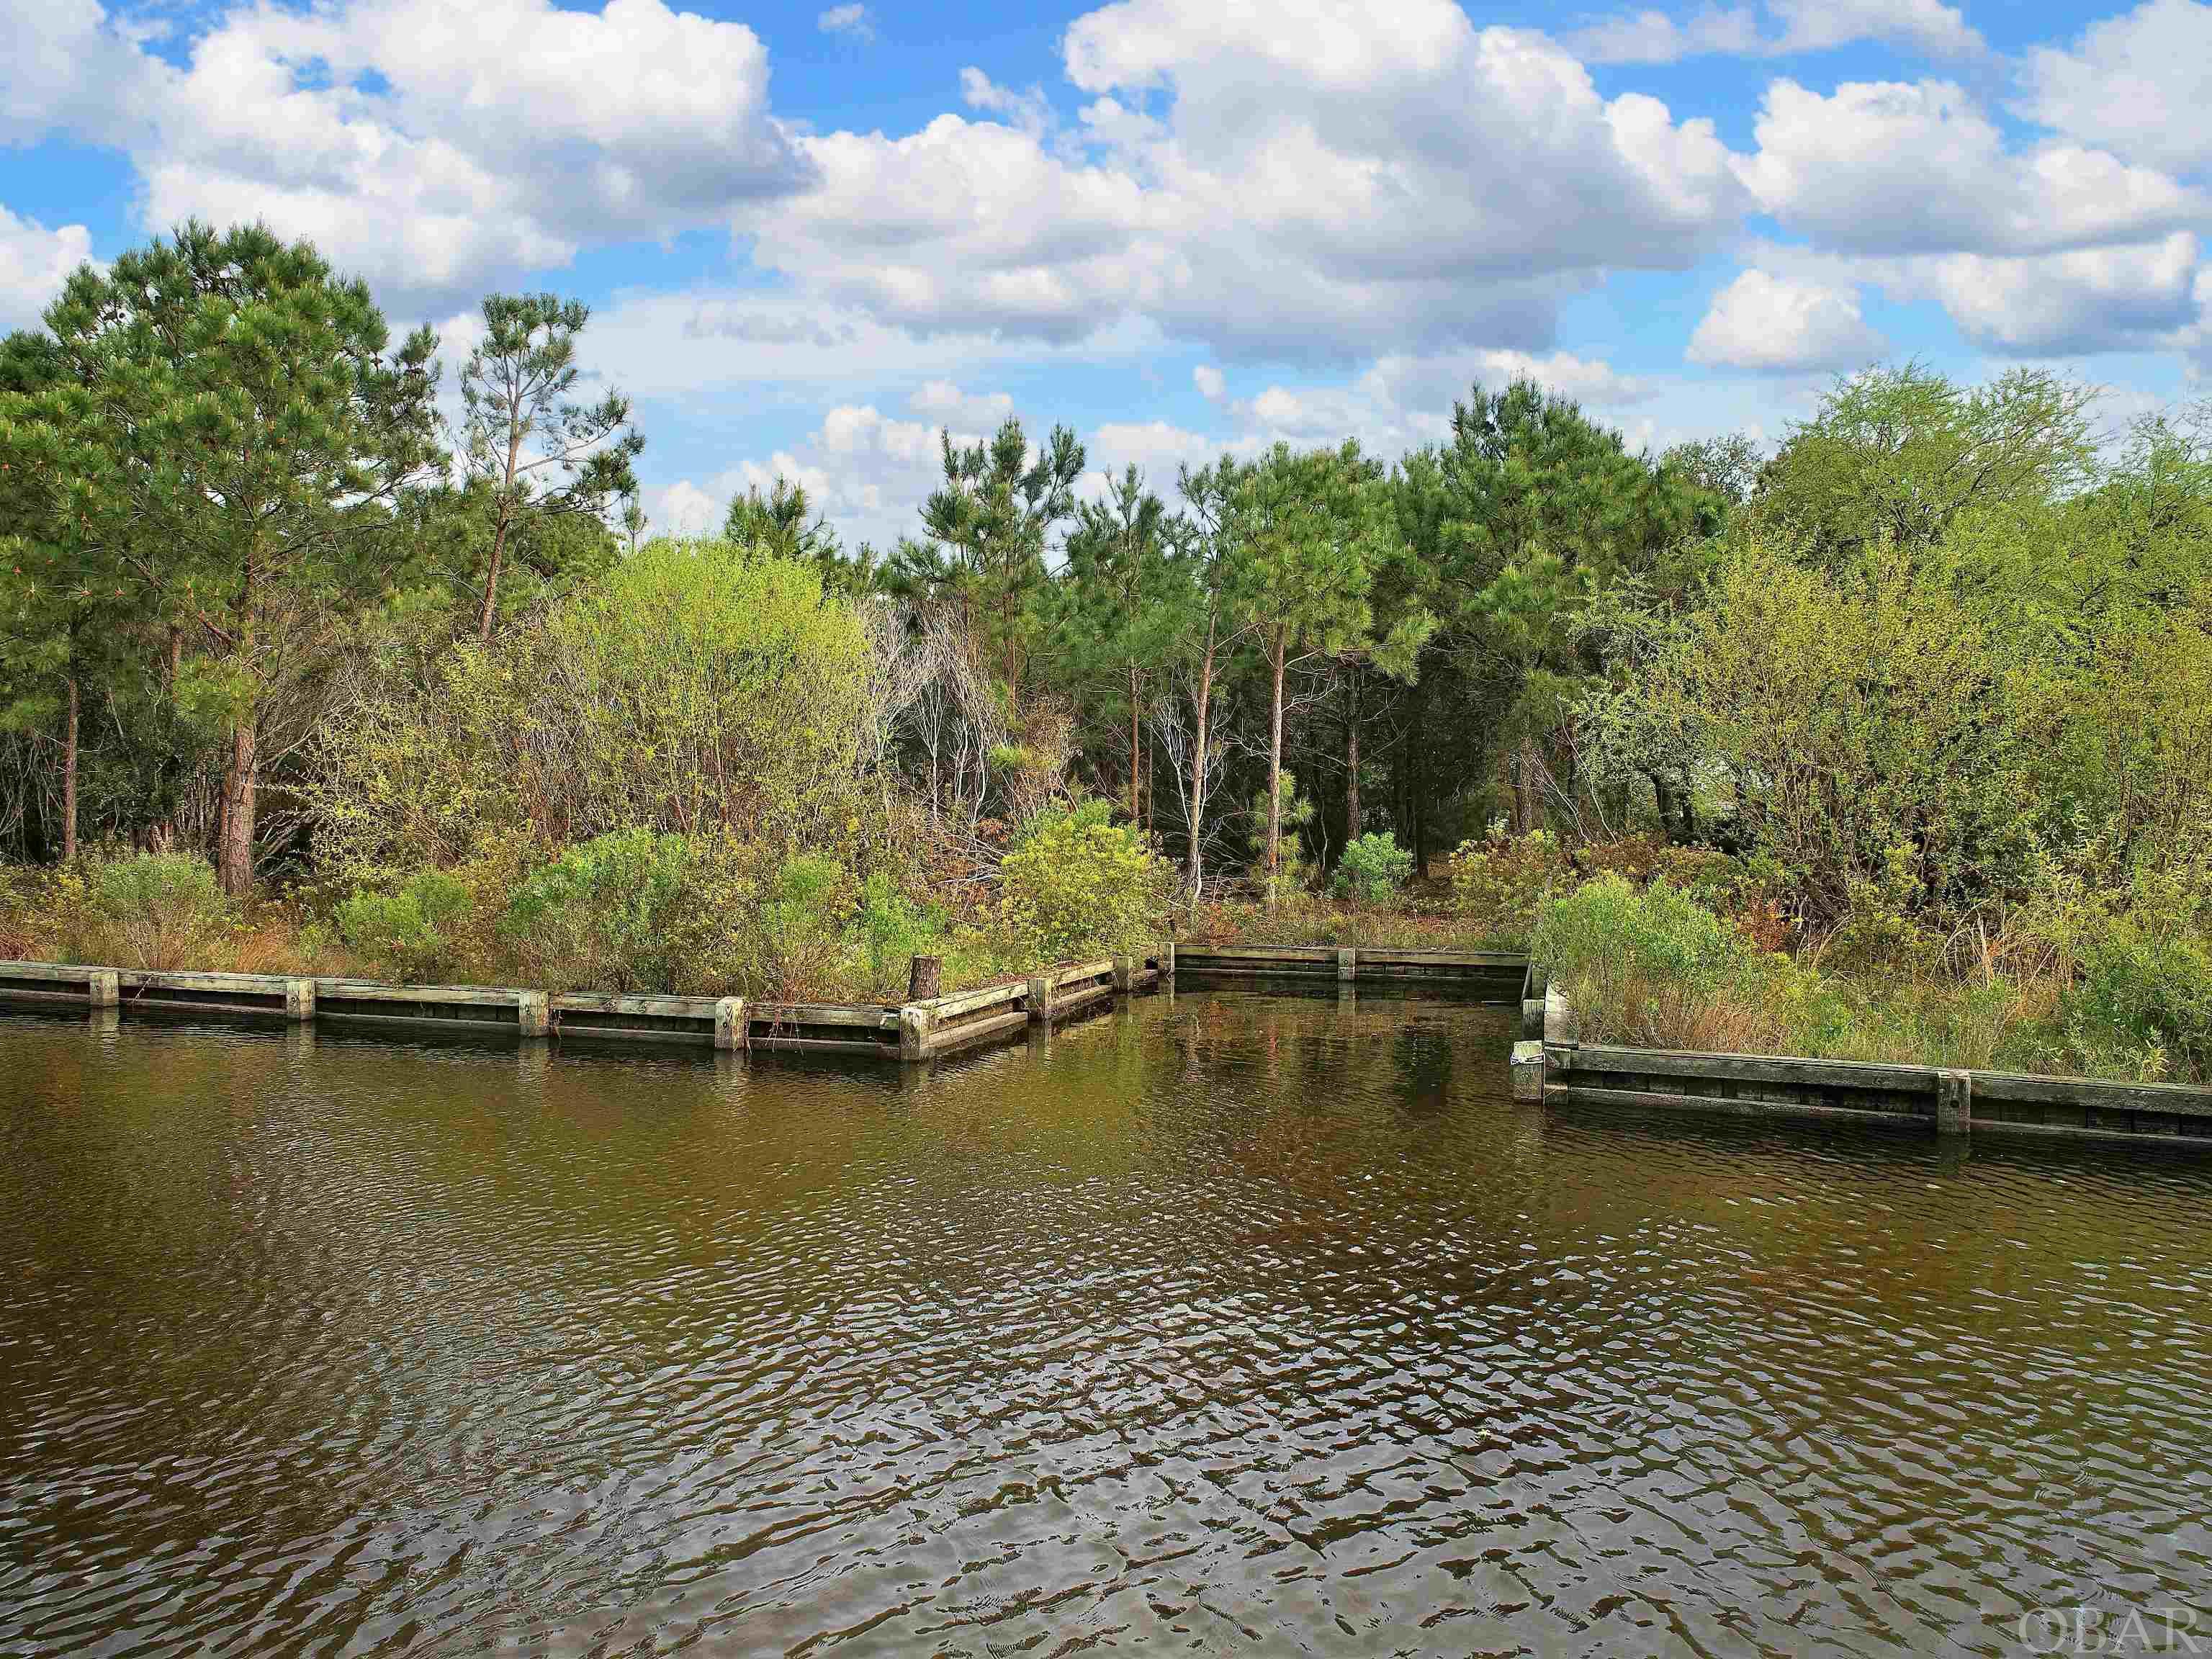 Ready to trade in the pavement for a life on the water? Look no further! This breathtaking canalfront lot in Carova Beach is the perfect spot to build your dream home. Partially cleared and already equipped with a bulkhead and boat slip, this lot offers endless possibilities for waterfront living. Plus, with its close proximity to the entrance to the sound, you'll have easy access to all the boating and water activities you could imagine. Imagine waking up to the peaceful setting of this lot, which is perfect for your private sanctuary. Choose your dream home plan and builder, and start living the life you've always wanted. Don't miss this amazing deal - act now!